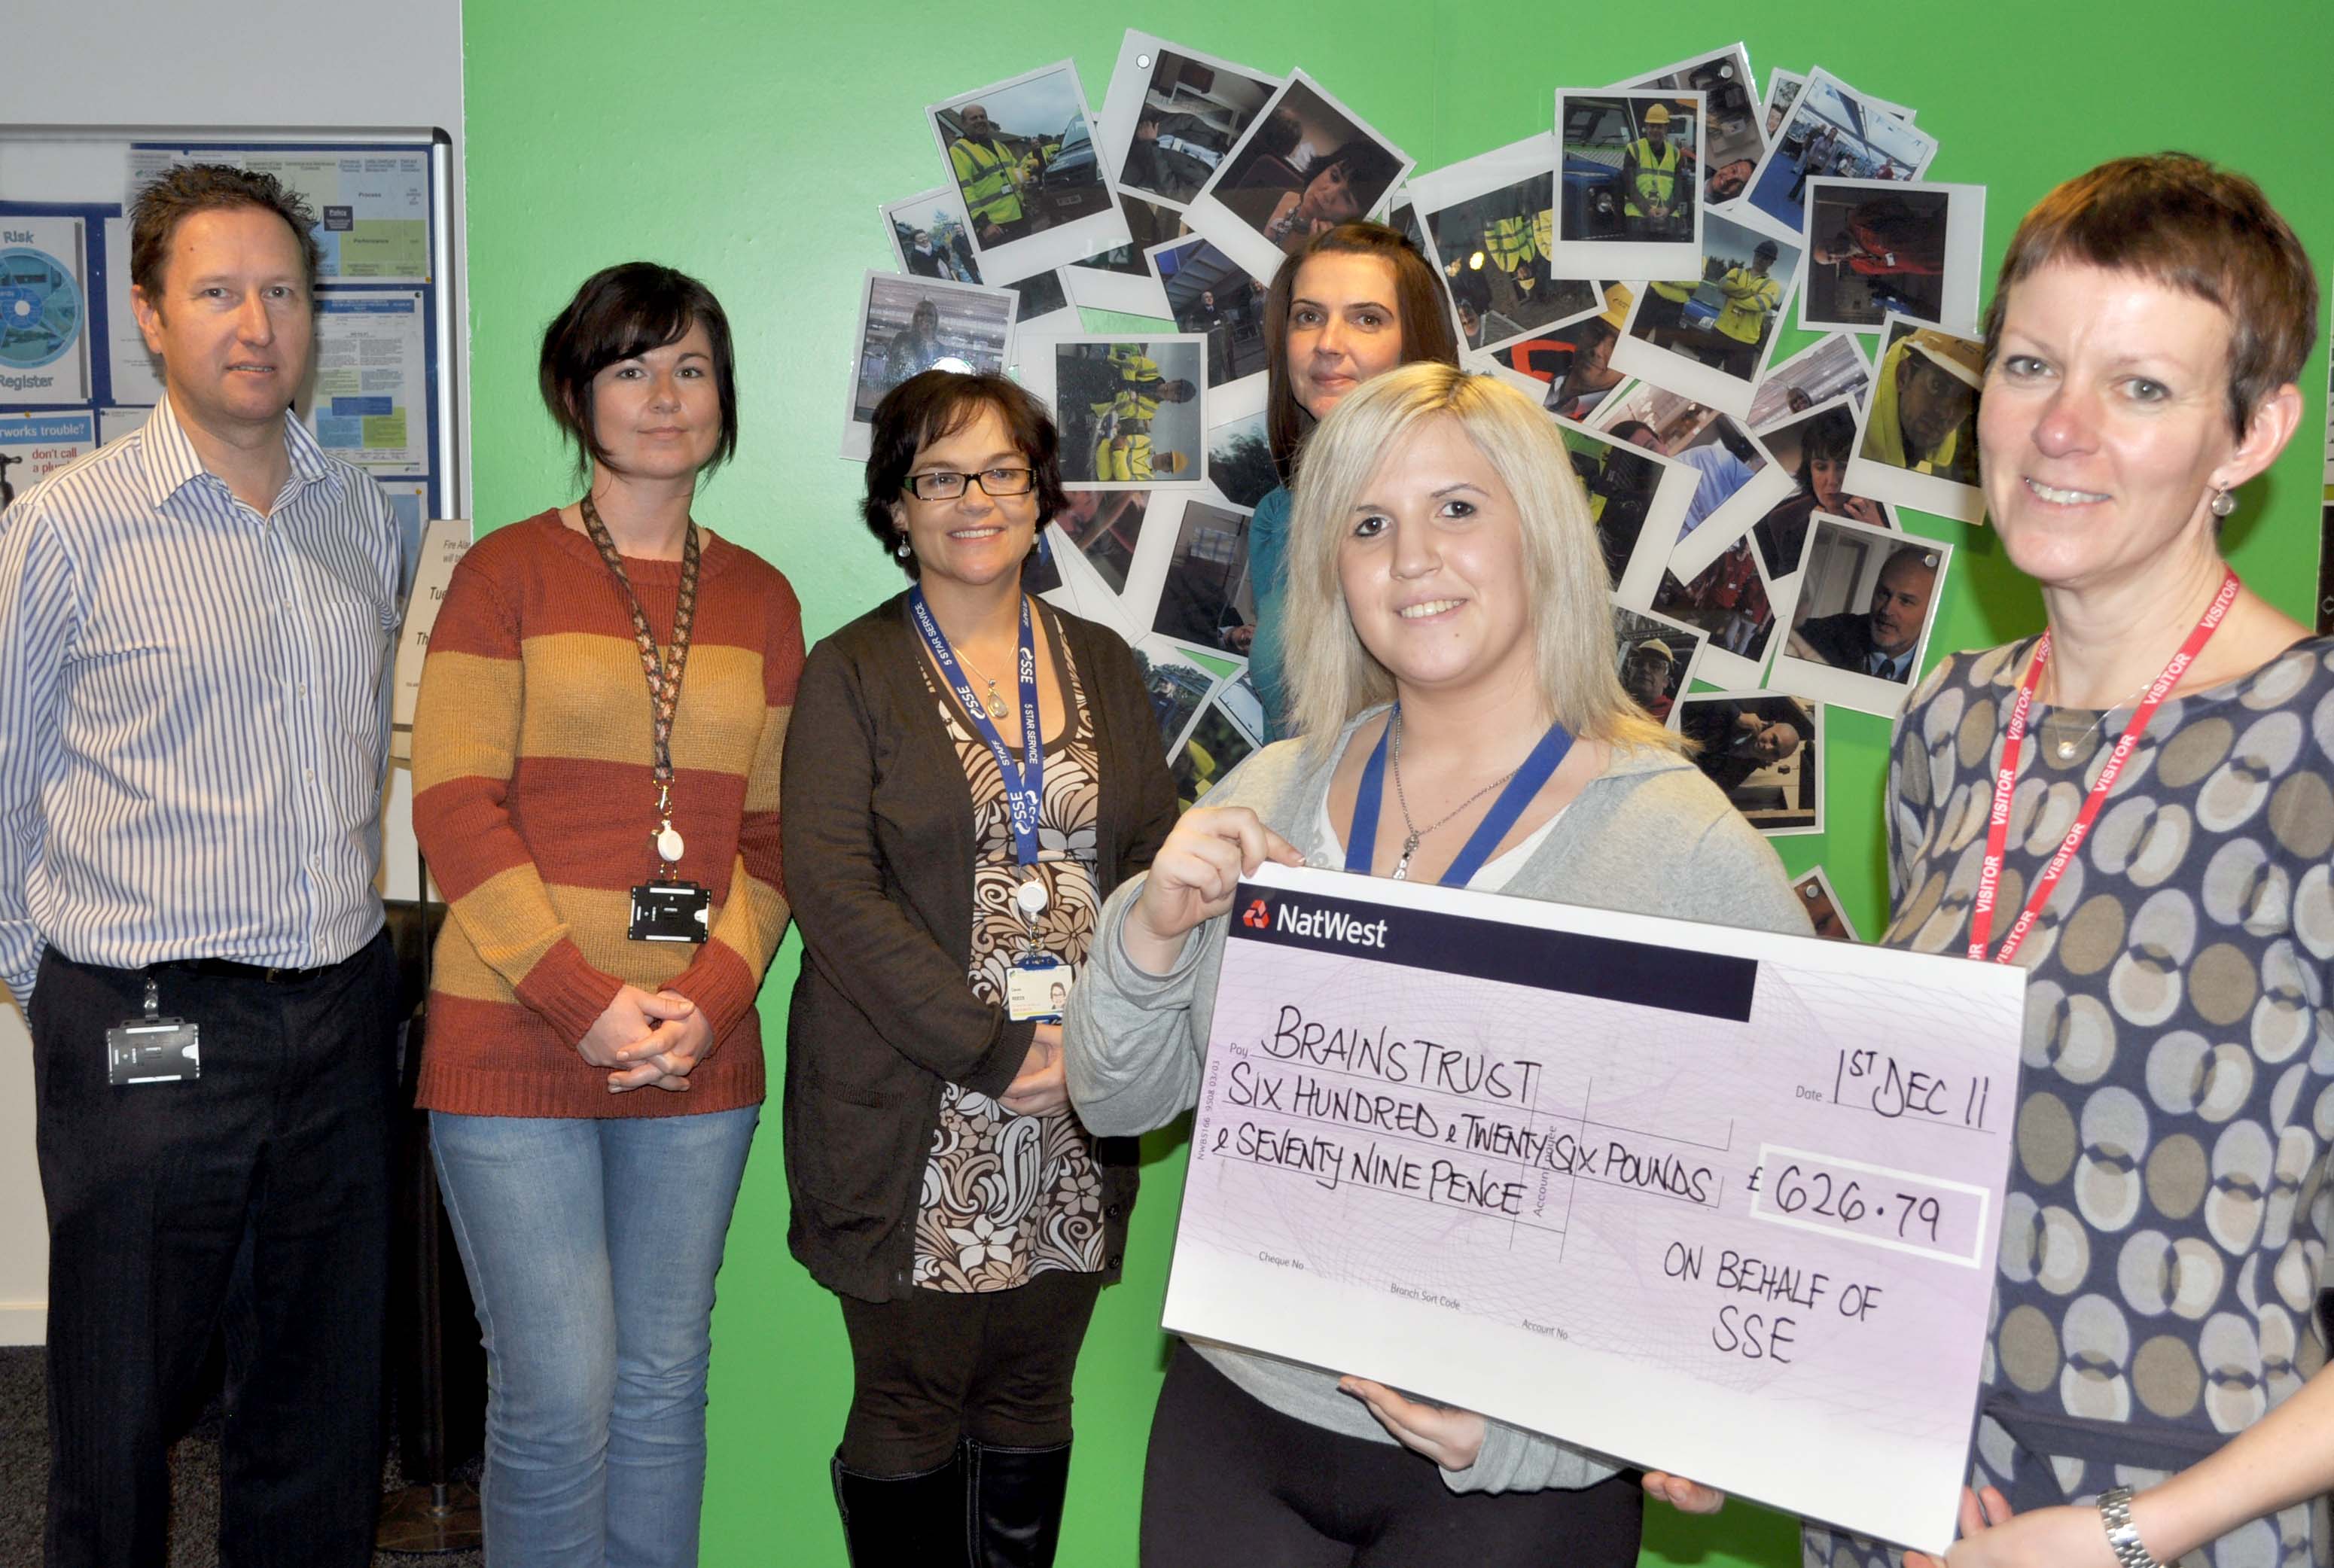 Southern Electric present £626 cheque to brainstrust